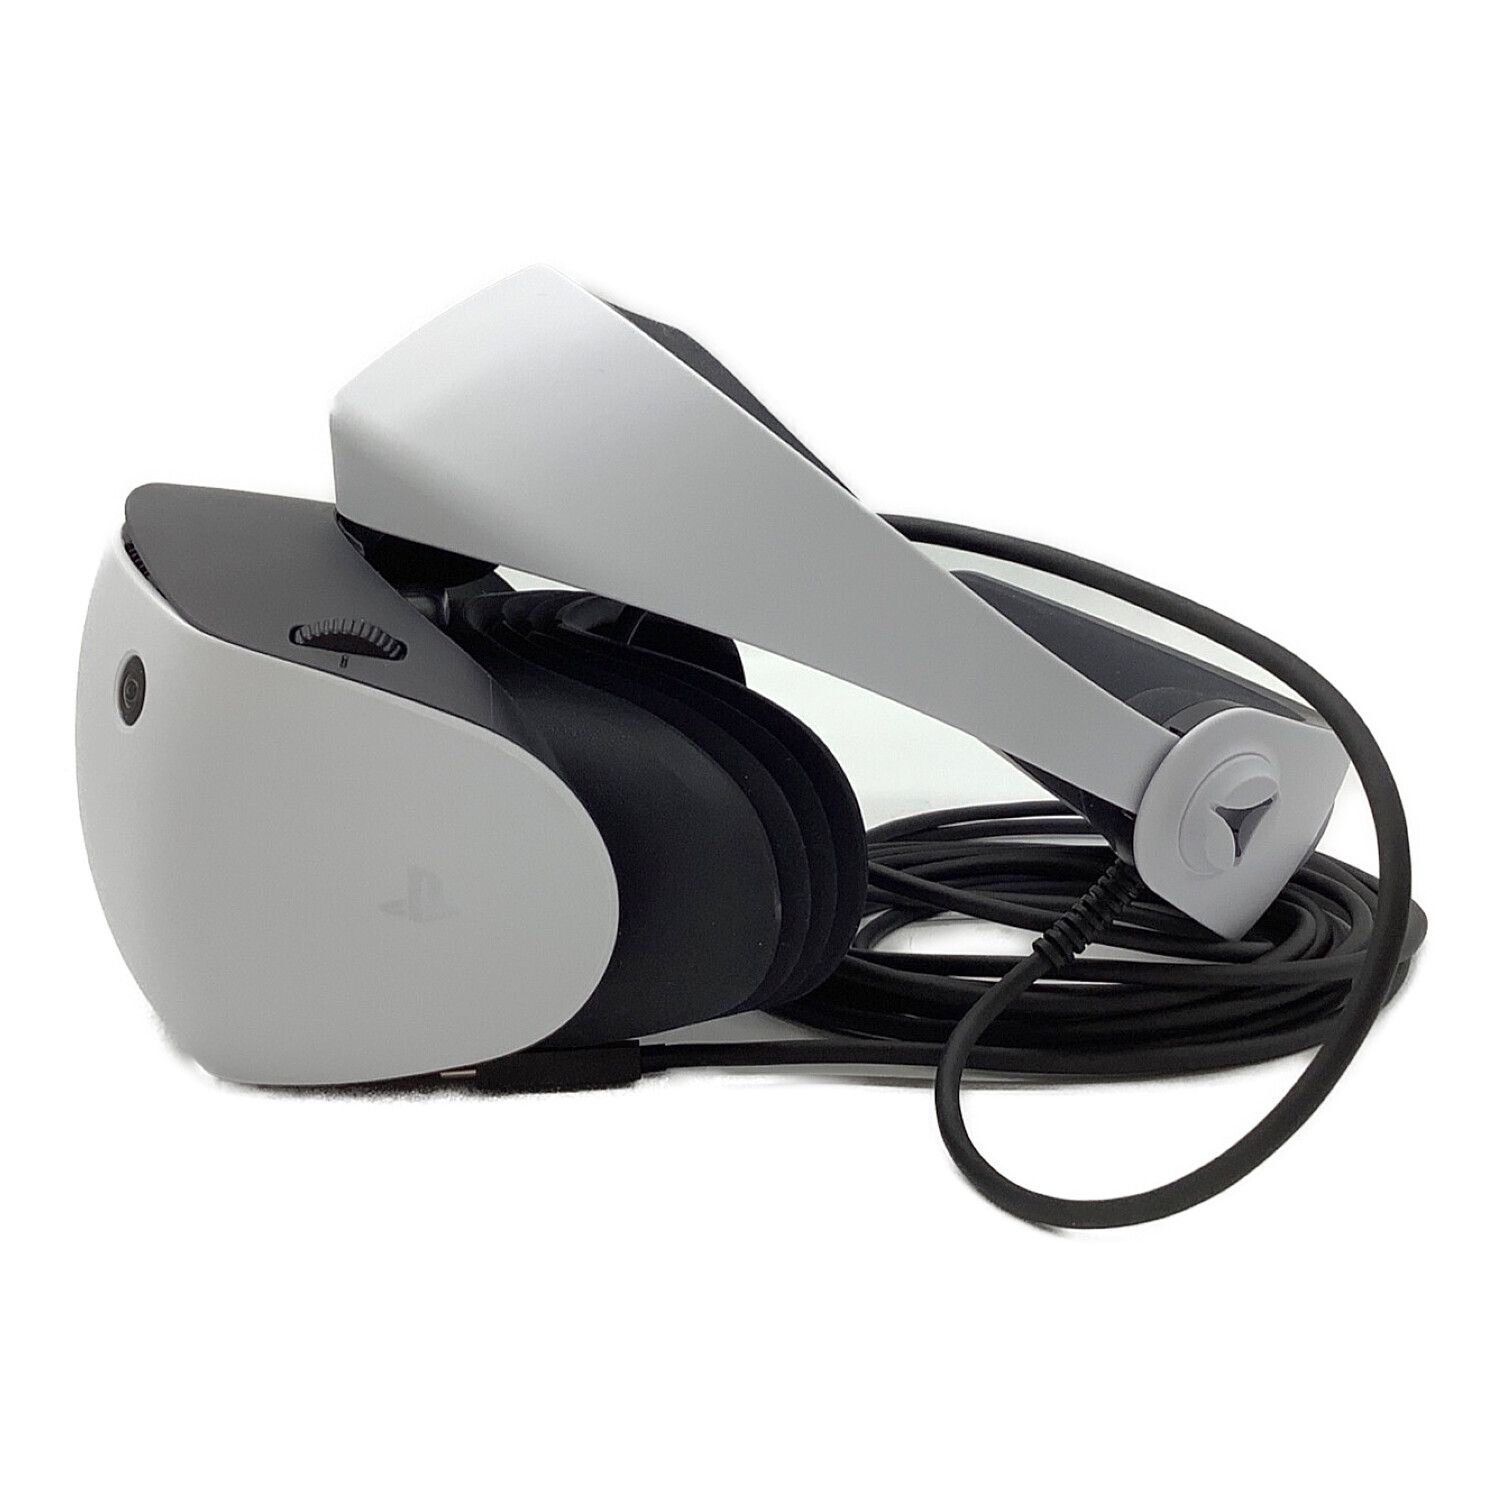 Buy Sony Playstation VR2 CFIJ-17000 from Japan - Buy authentic